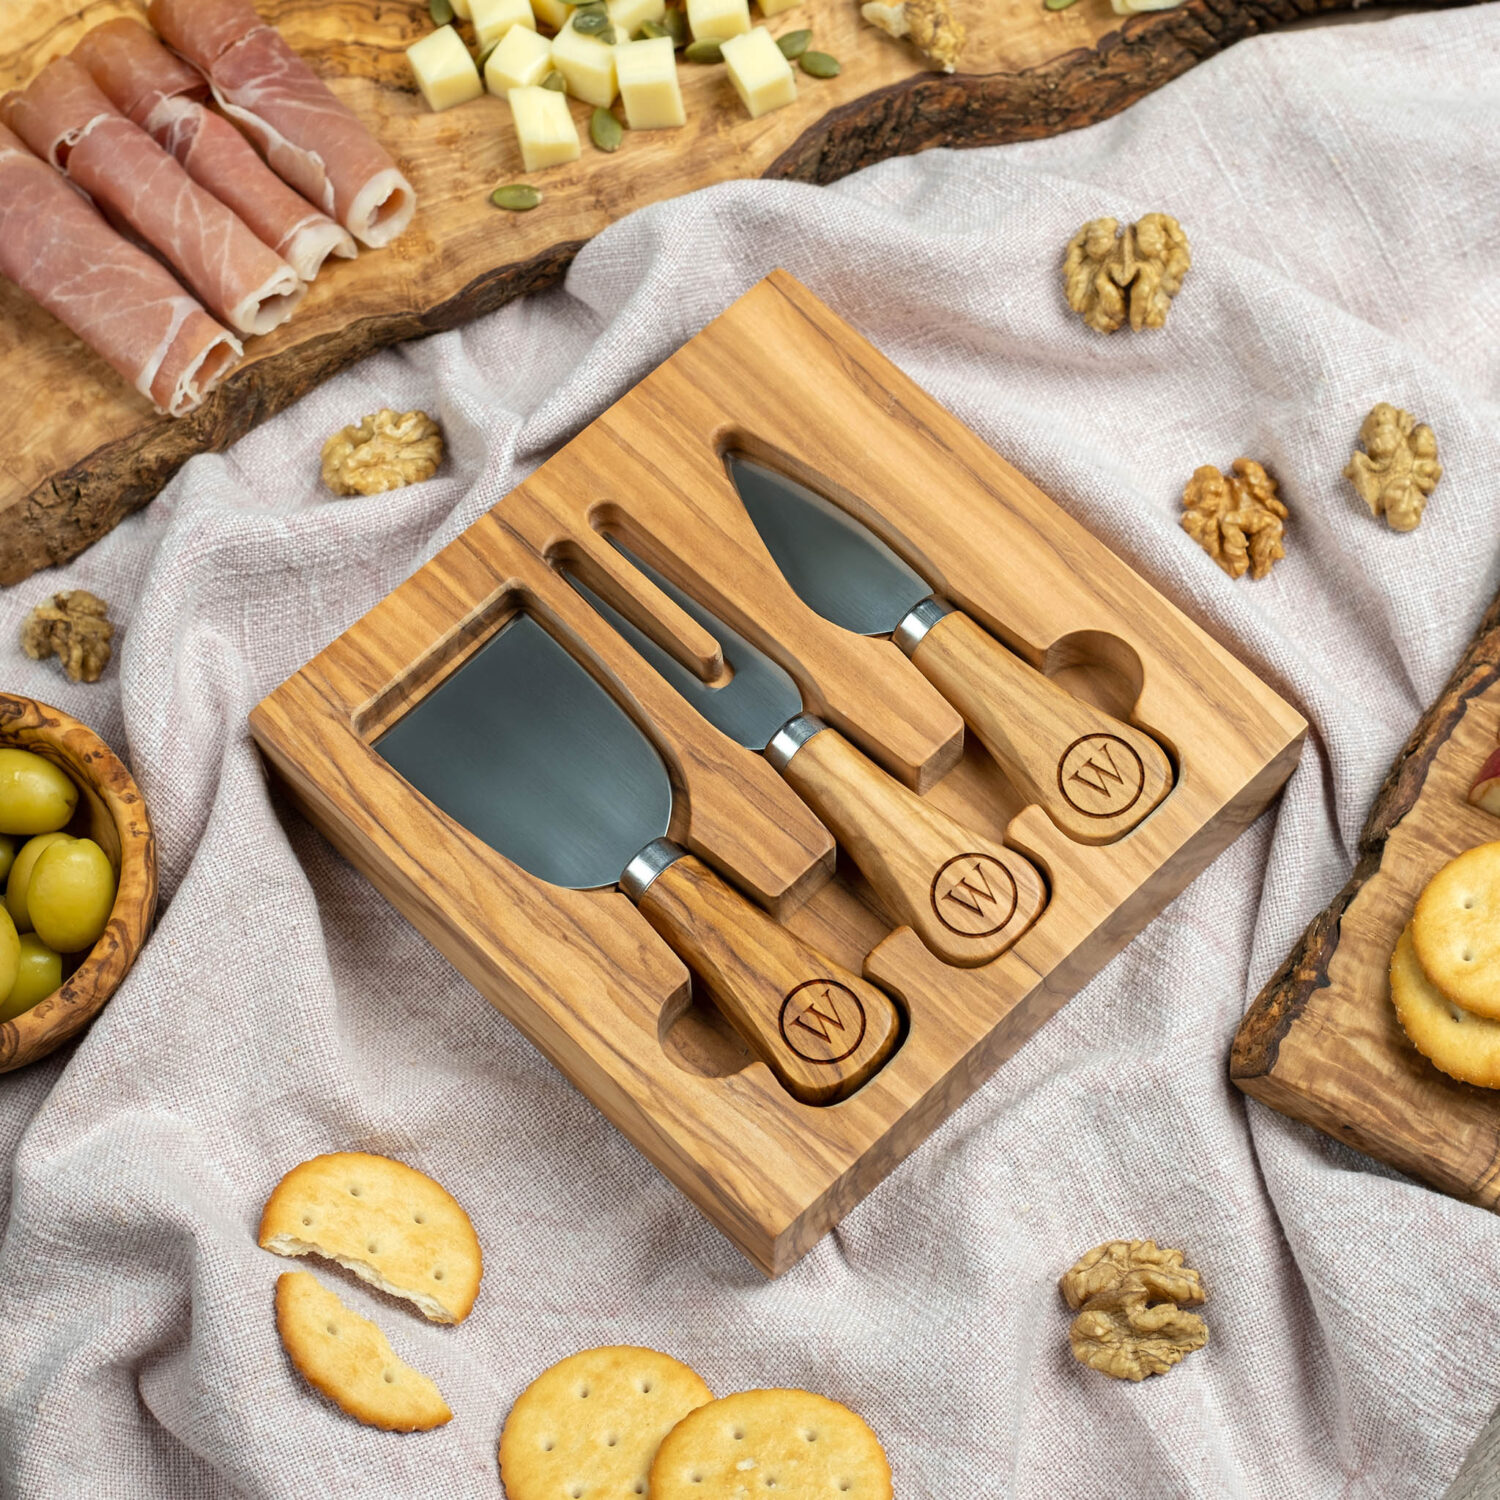 A cheese board with knives on a table surrounded by various appetizers.